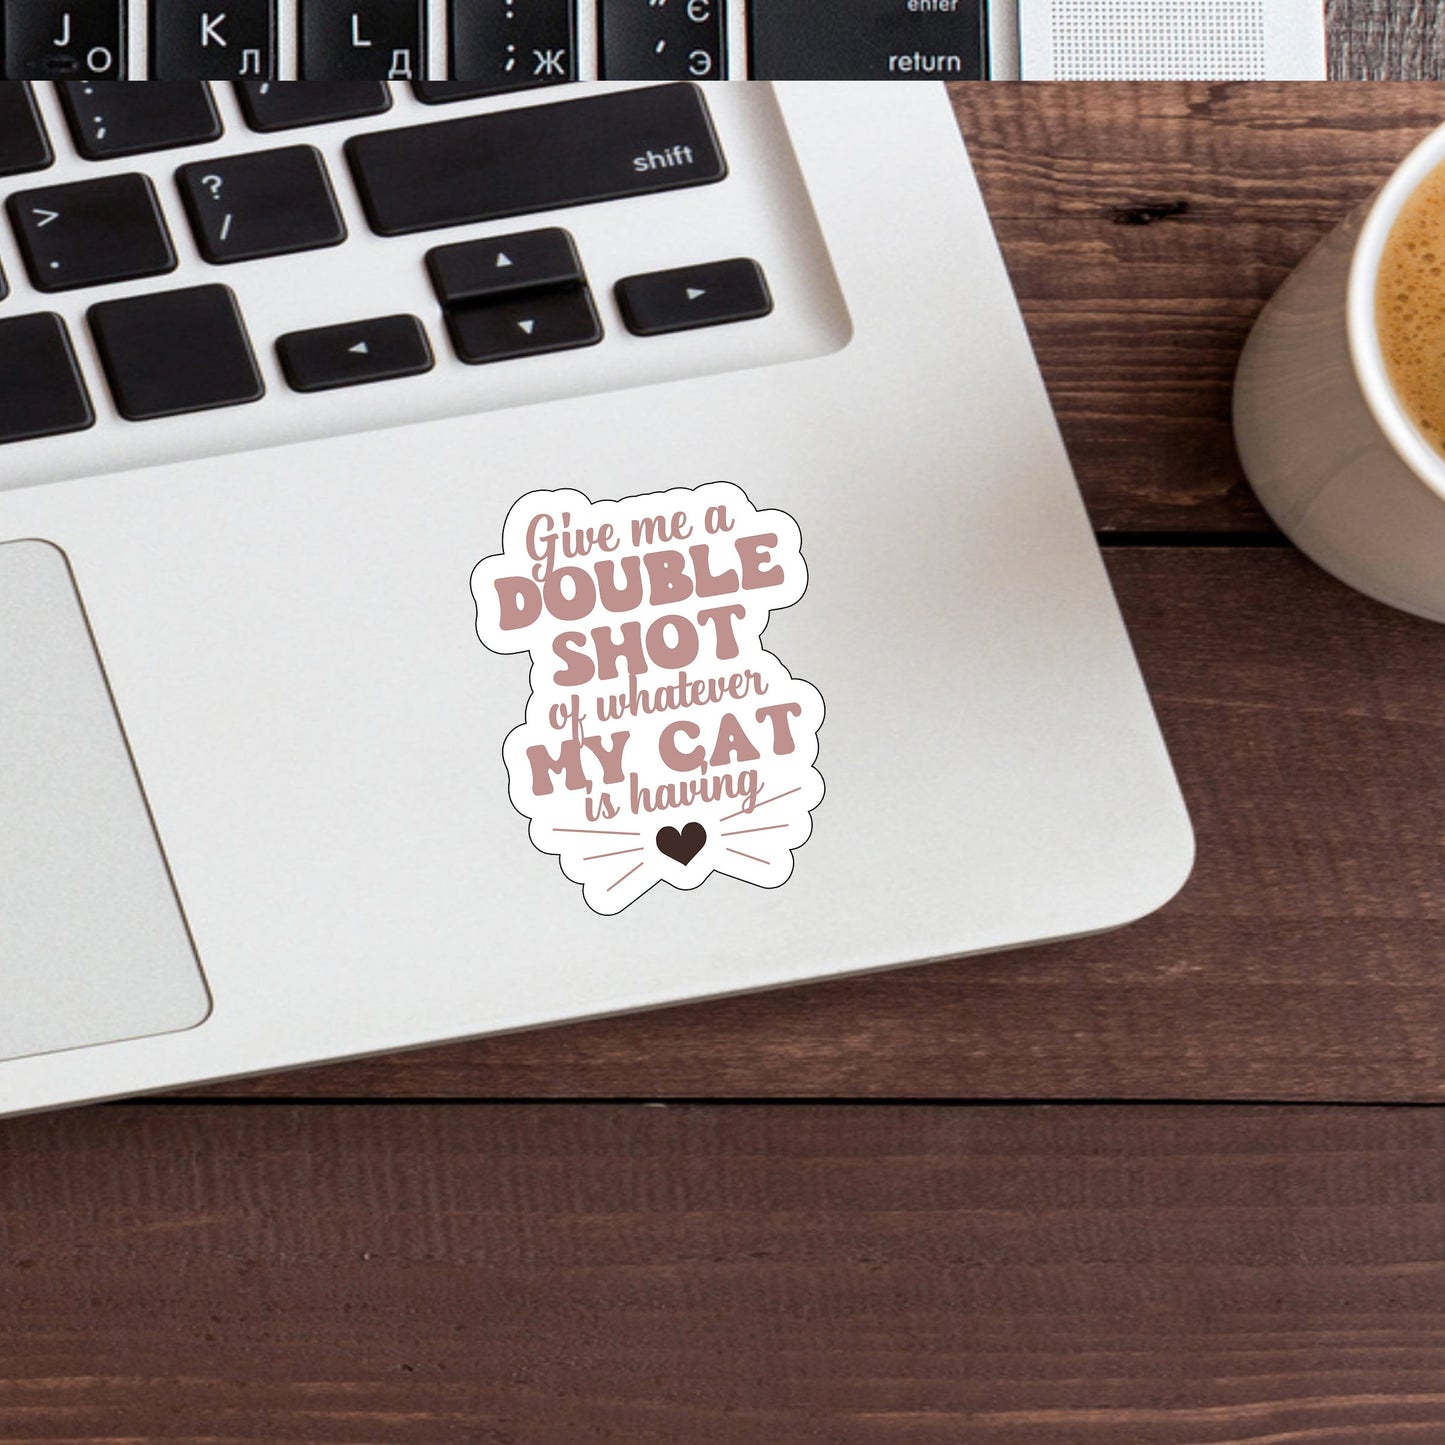 Give me a double shot of whatever my cat is having  Sticker,  Vinyl sticker, laptop sticker, Tablet sticker